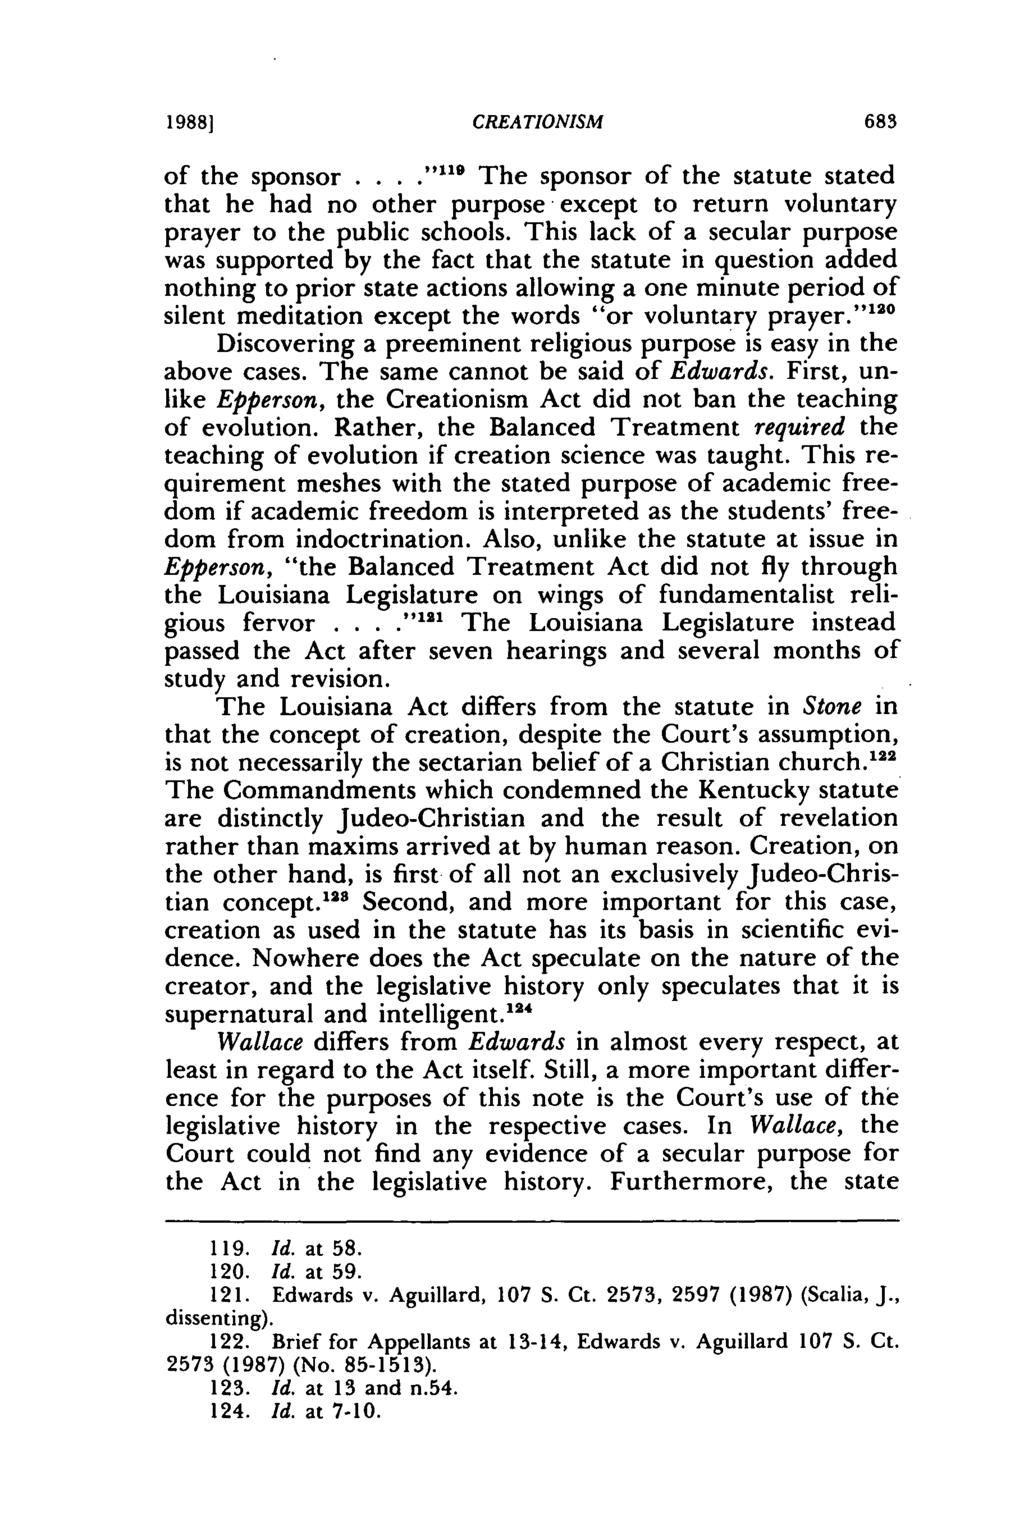 1988] CREATIONISM of the sponsor... "119 The sponsor of the statute stated that he had no other purpose-except to return voluntary prayer to the public schools.